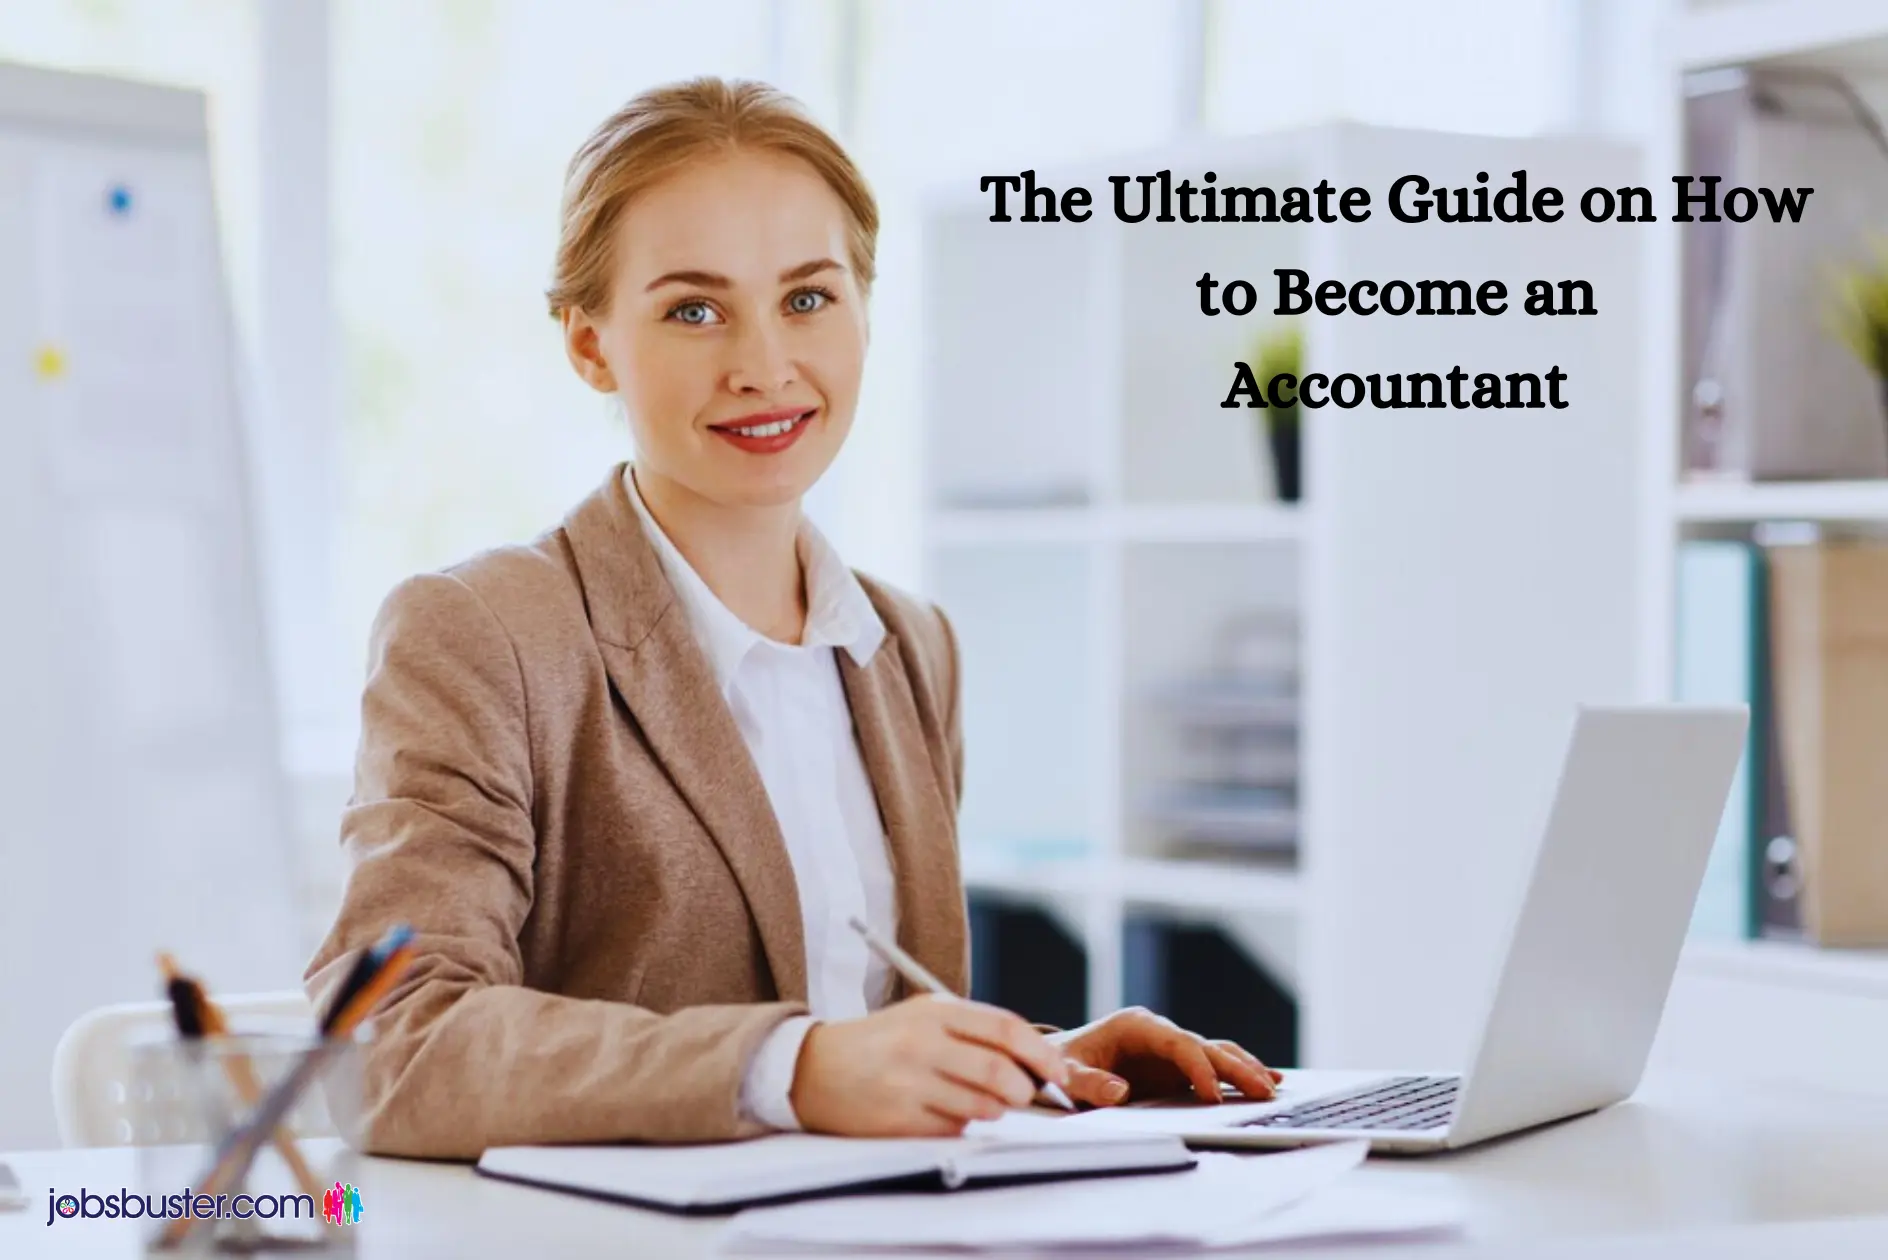 The Ultimate Guide on How to Become an Accountant